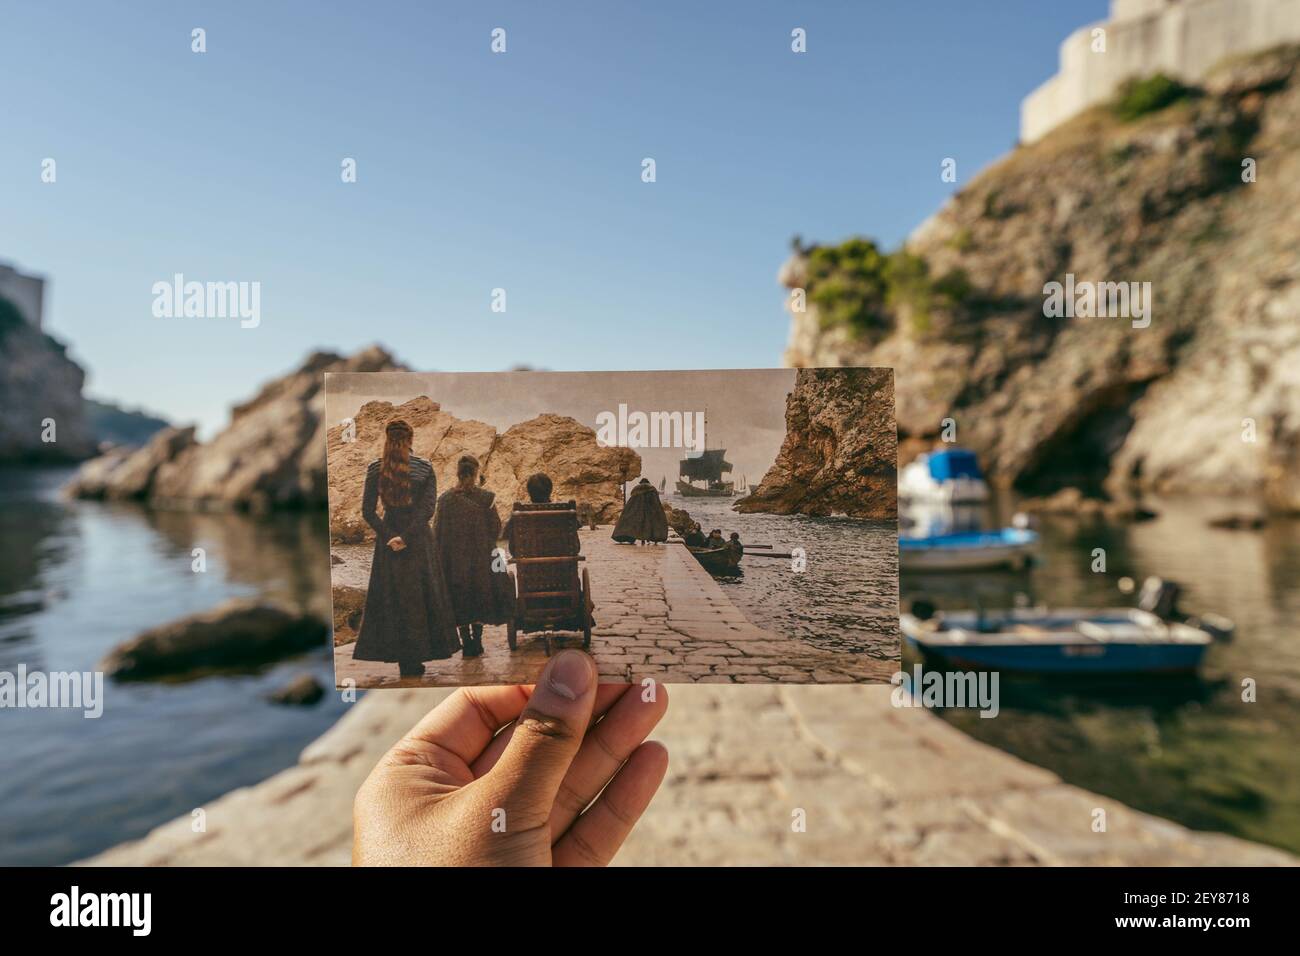 Dubrovnik, Croatia - Aug 23, 2020: Photo still of GOT show held at West Pier in morning Stock Photo